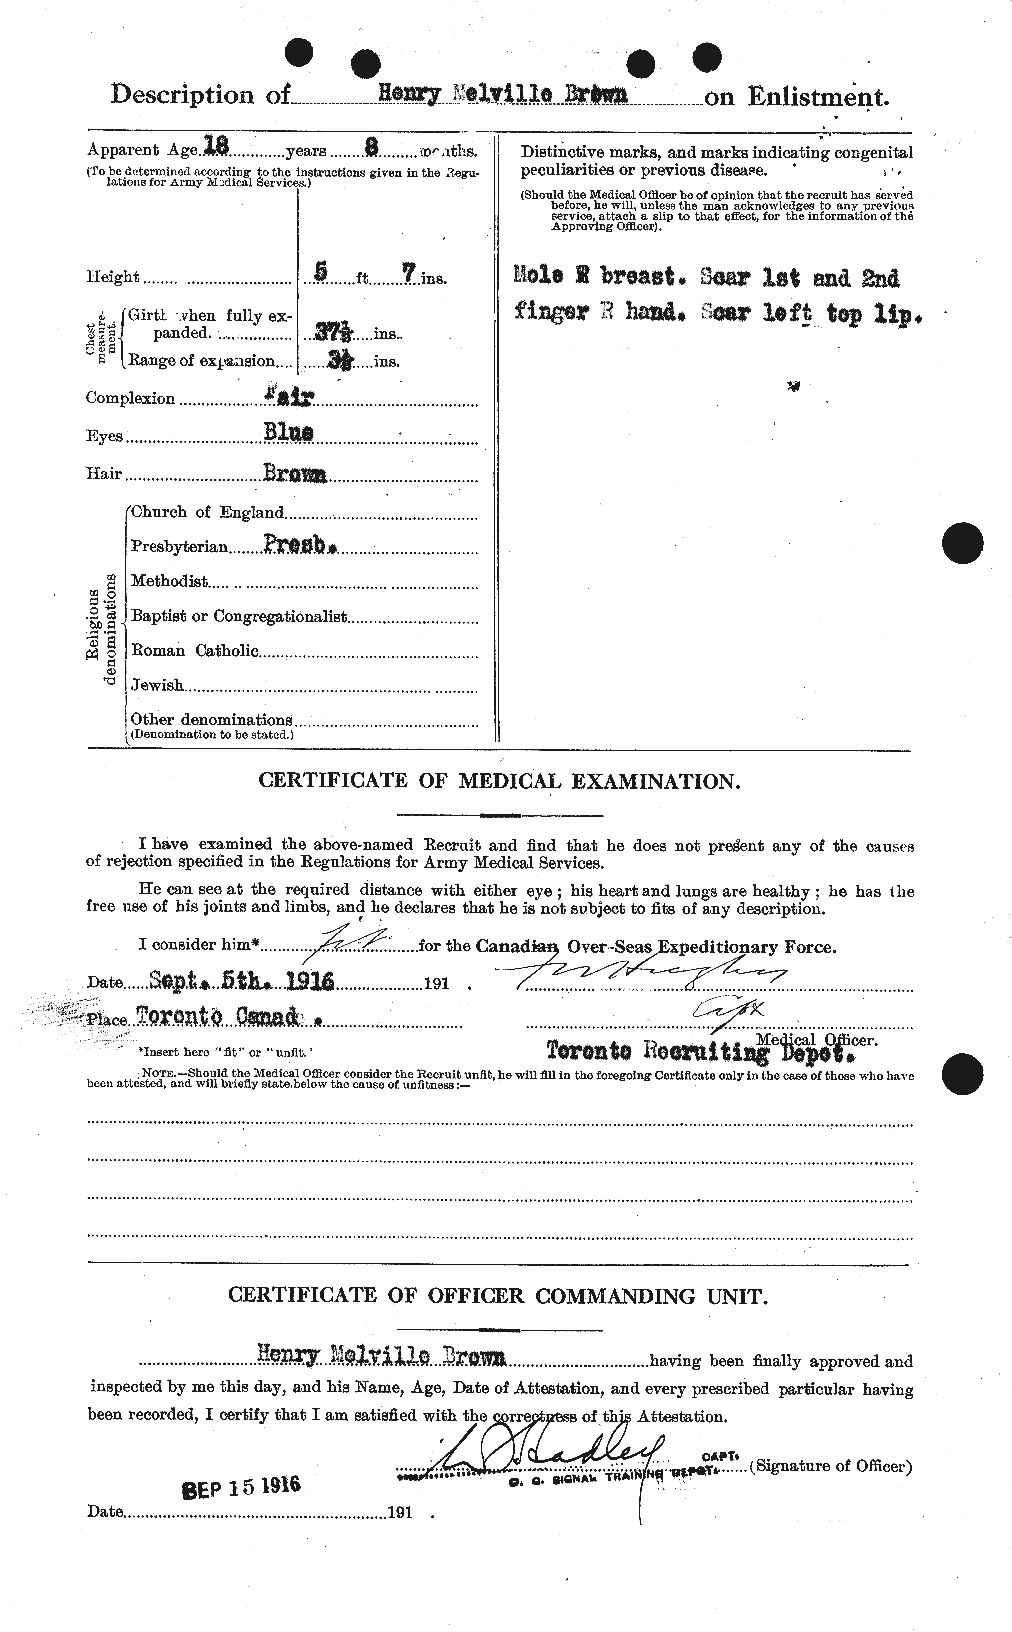 Personnel Records of the First World War - CEF 265534b